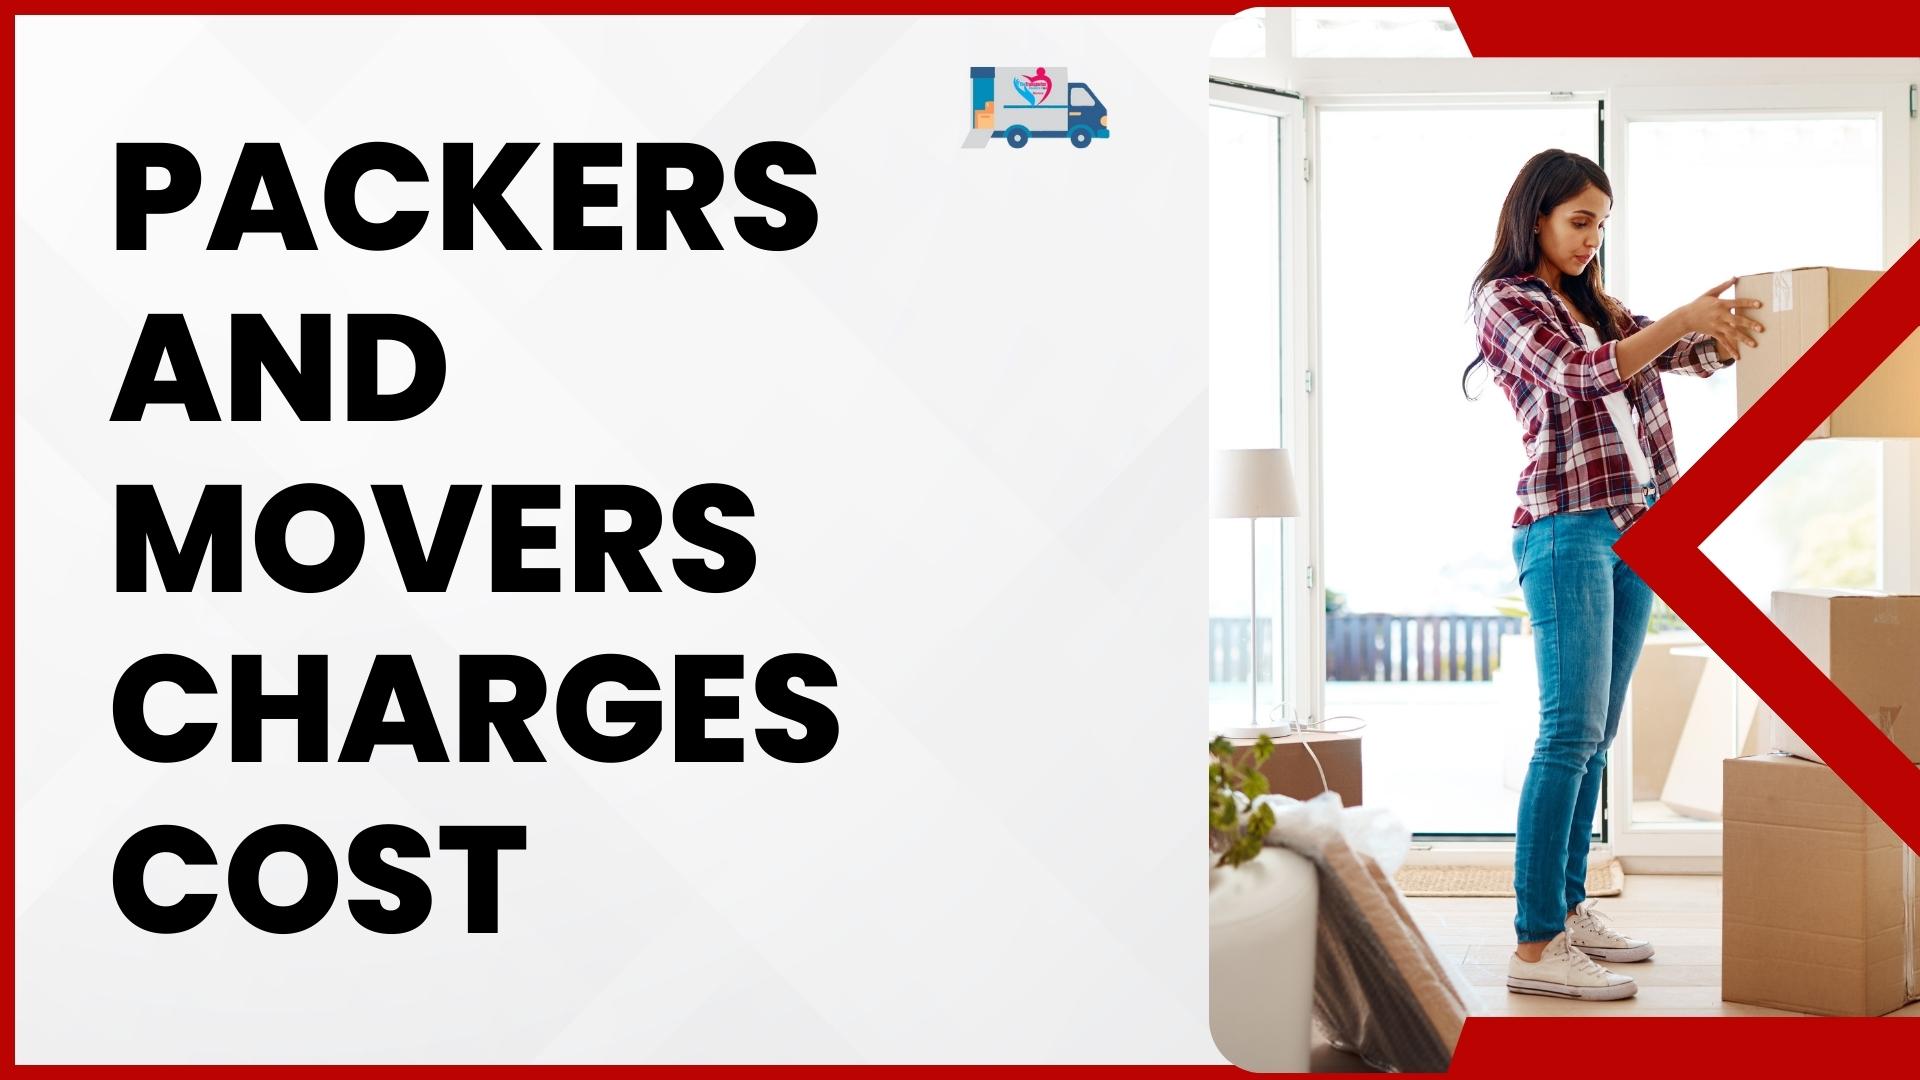 Packers and Movers offers competitive movers and packers Delhi rates and excellent services